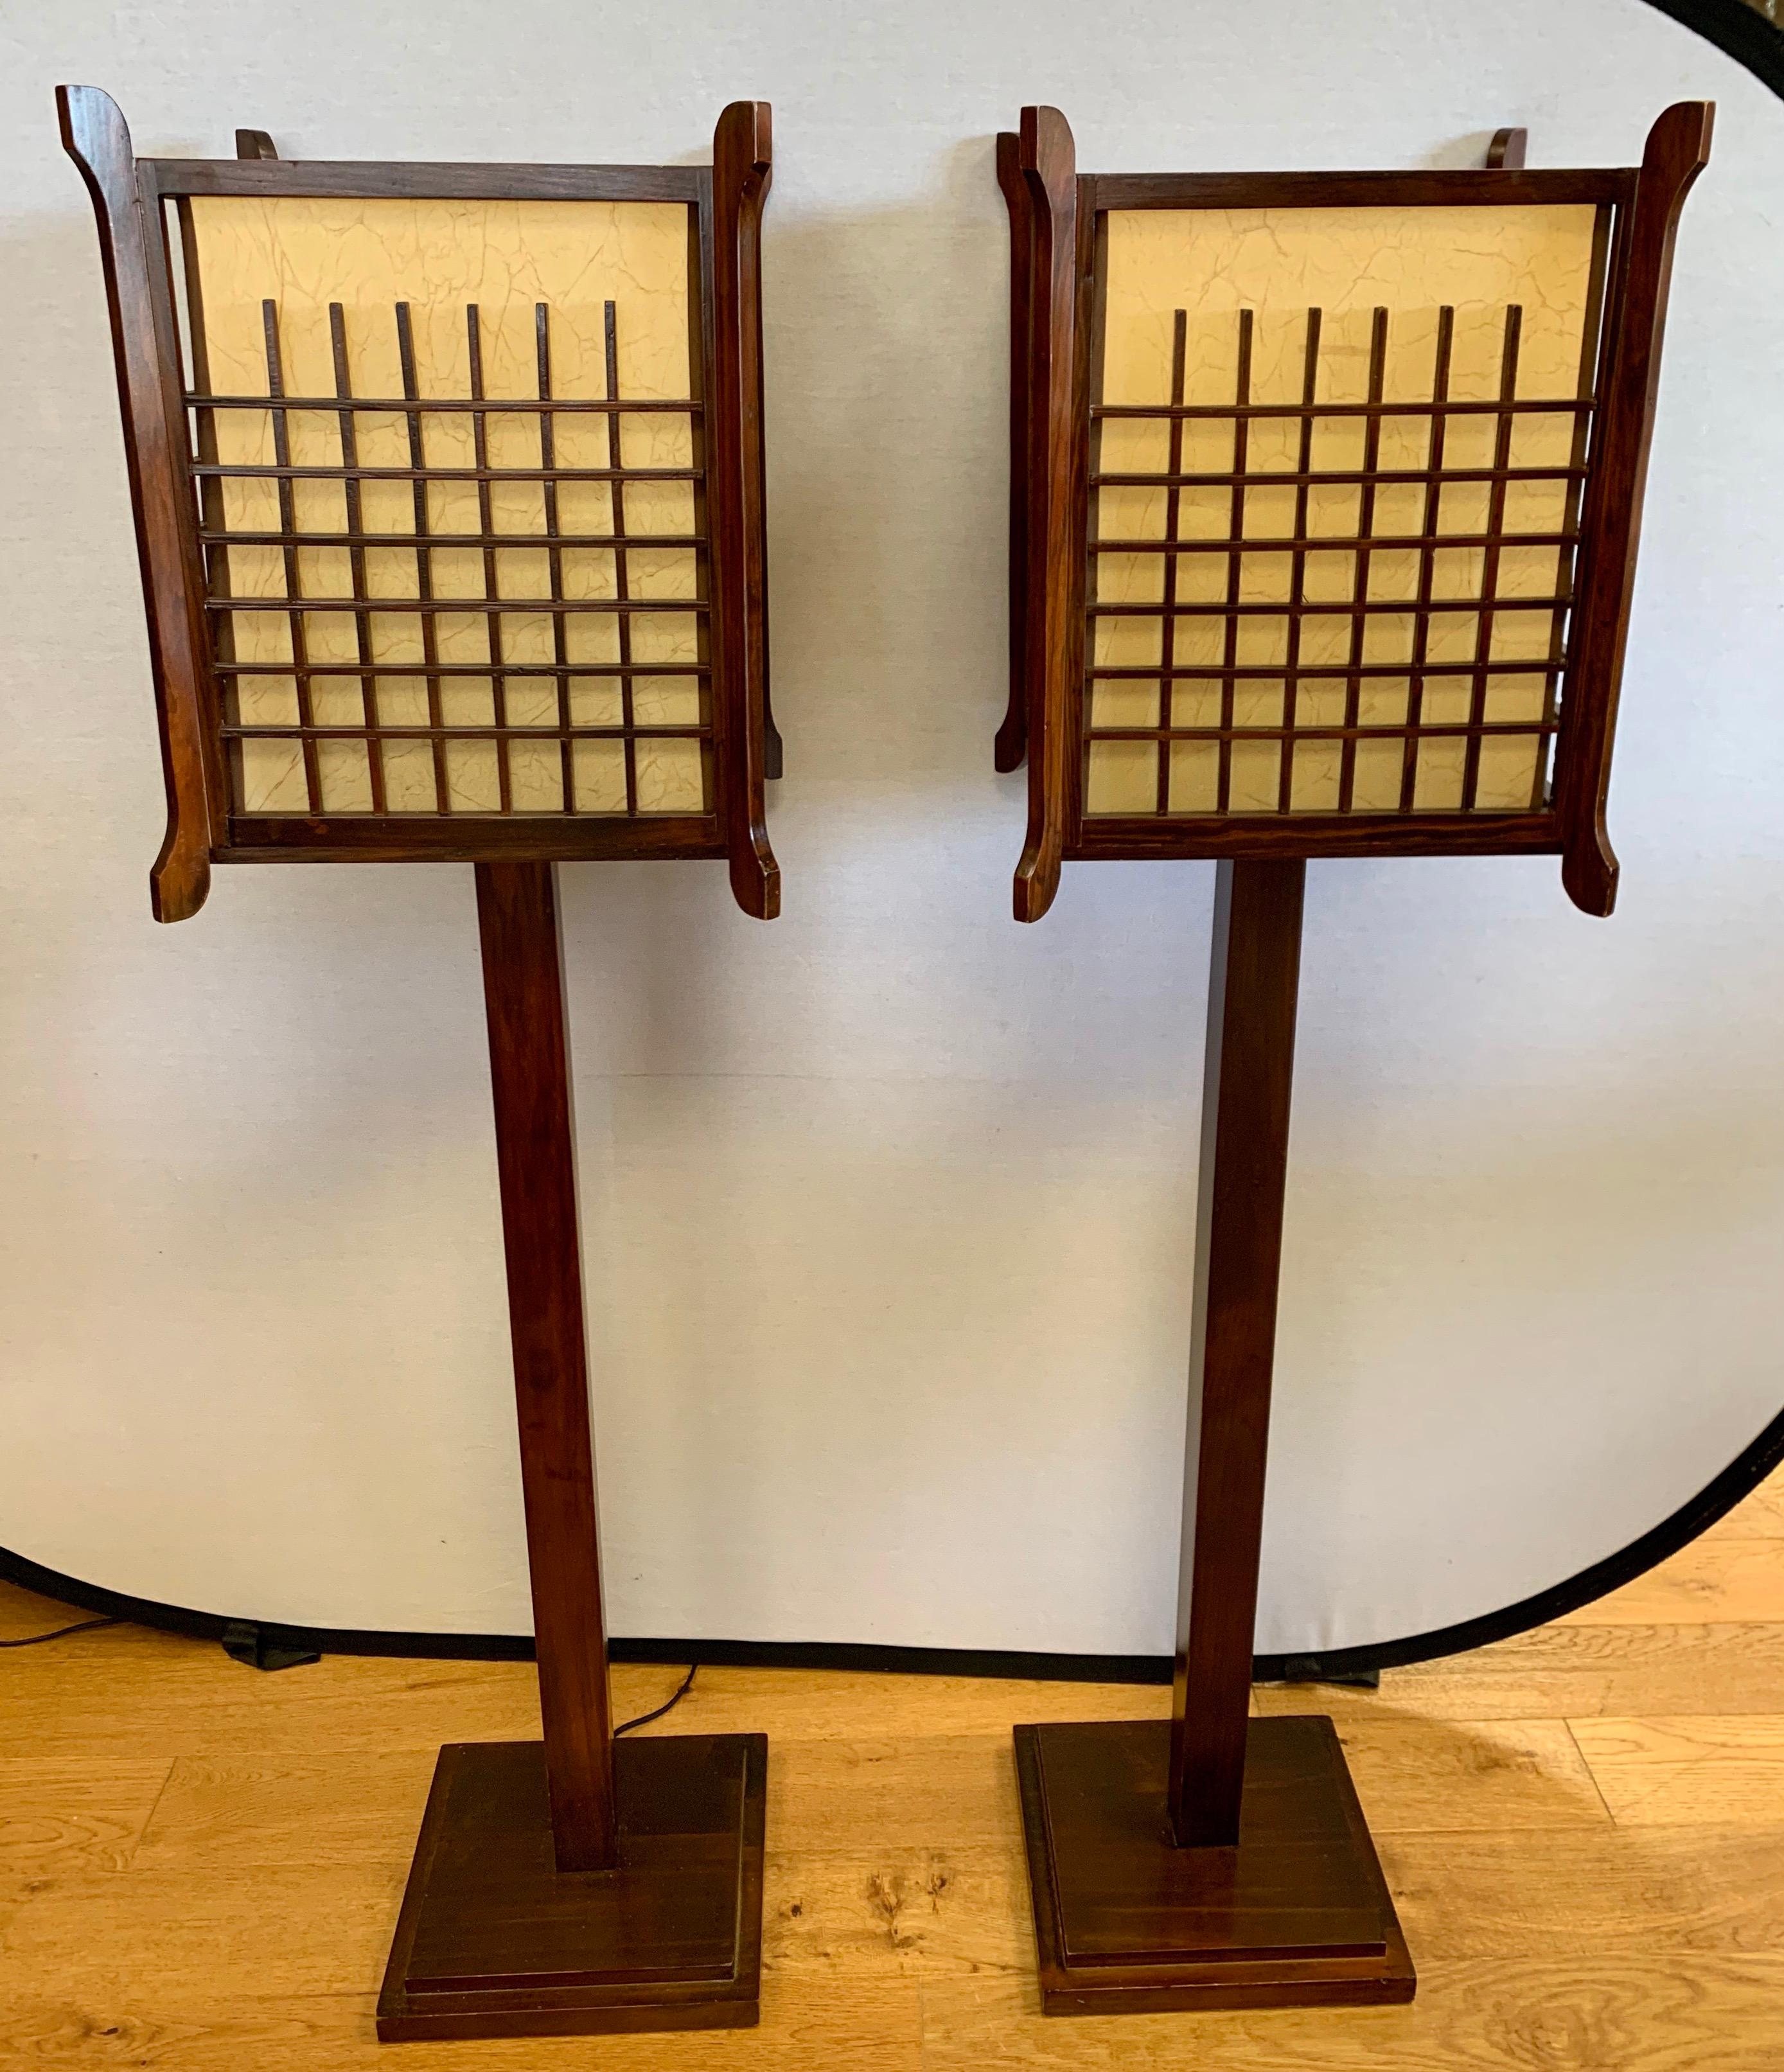 Stunning pair of Japanese style tall floor lamps in a mahogany finish with intricate geometric lattice
work over rice paper. Not your run of the mill reproduction. Vintage and real wood. The scale is perfect
and the modern lines allow them to